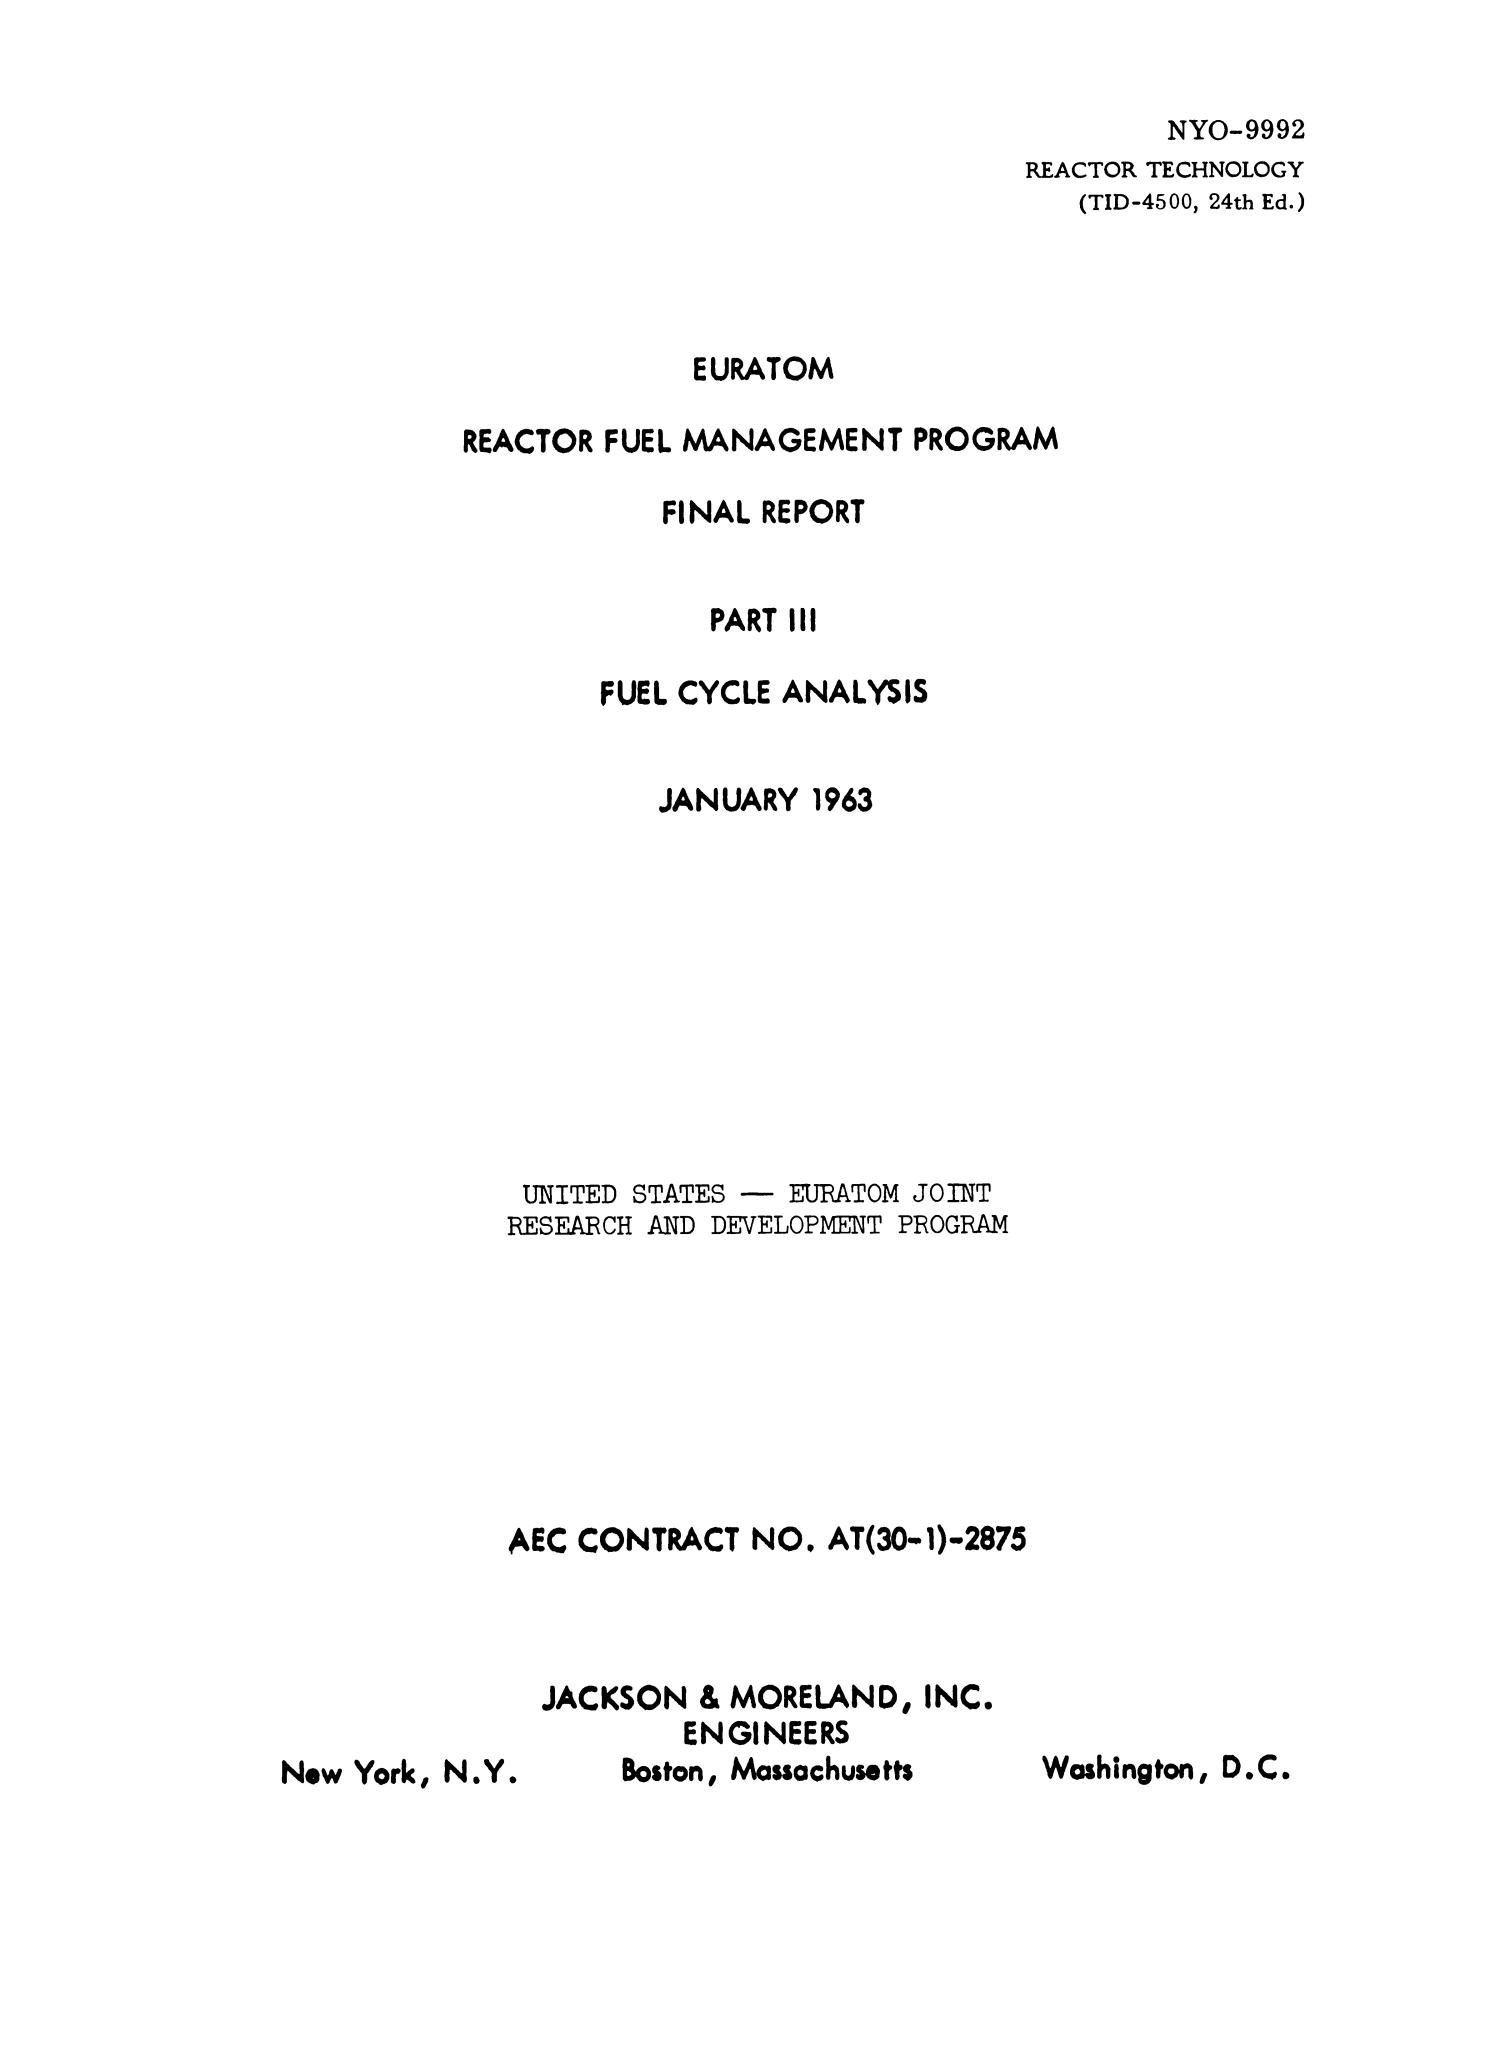 Euratom Reactor Fuel Management Program, Final Report: Part 3, Fuel Cycle Analysis
                                                
                                                    Title Page
                                                